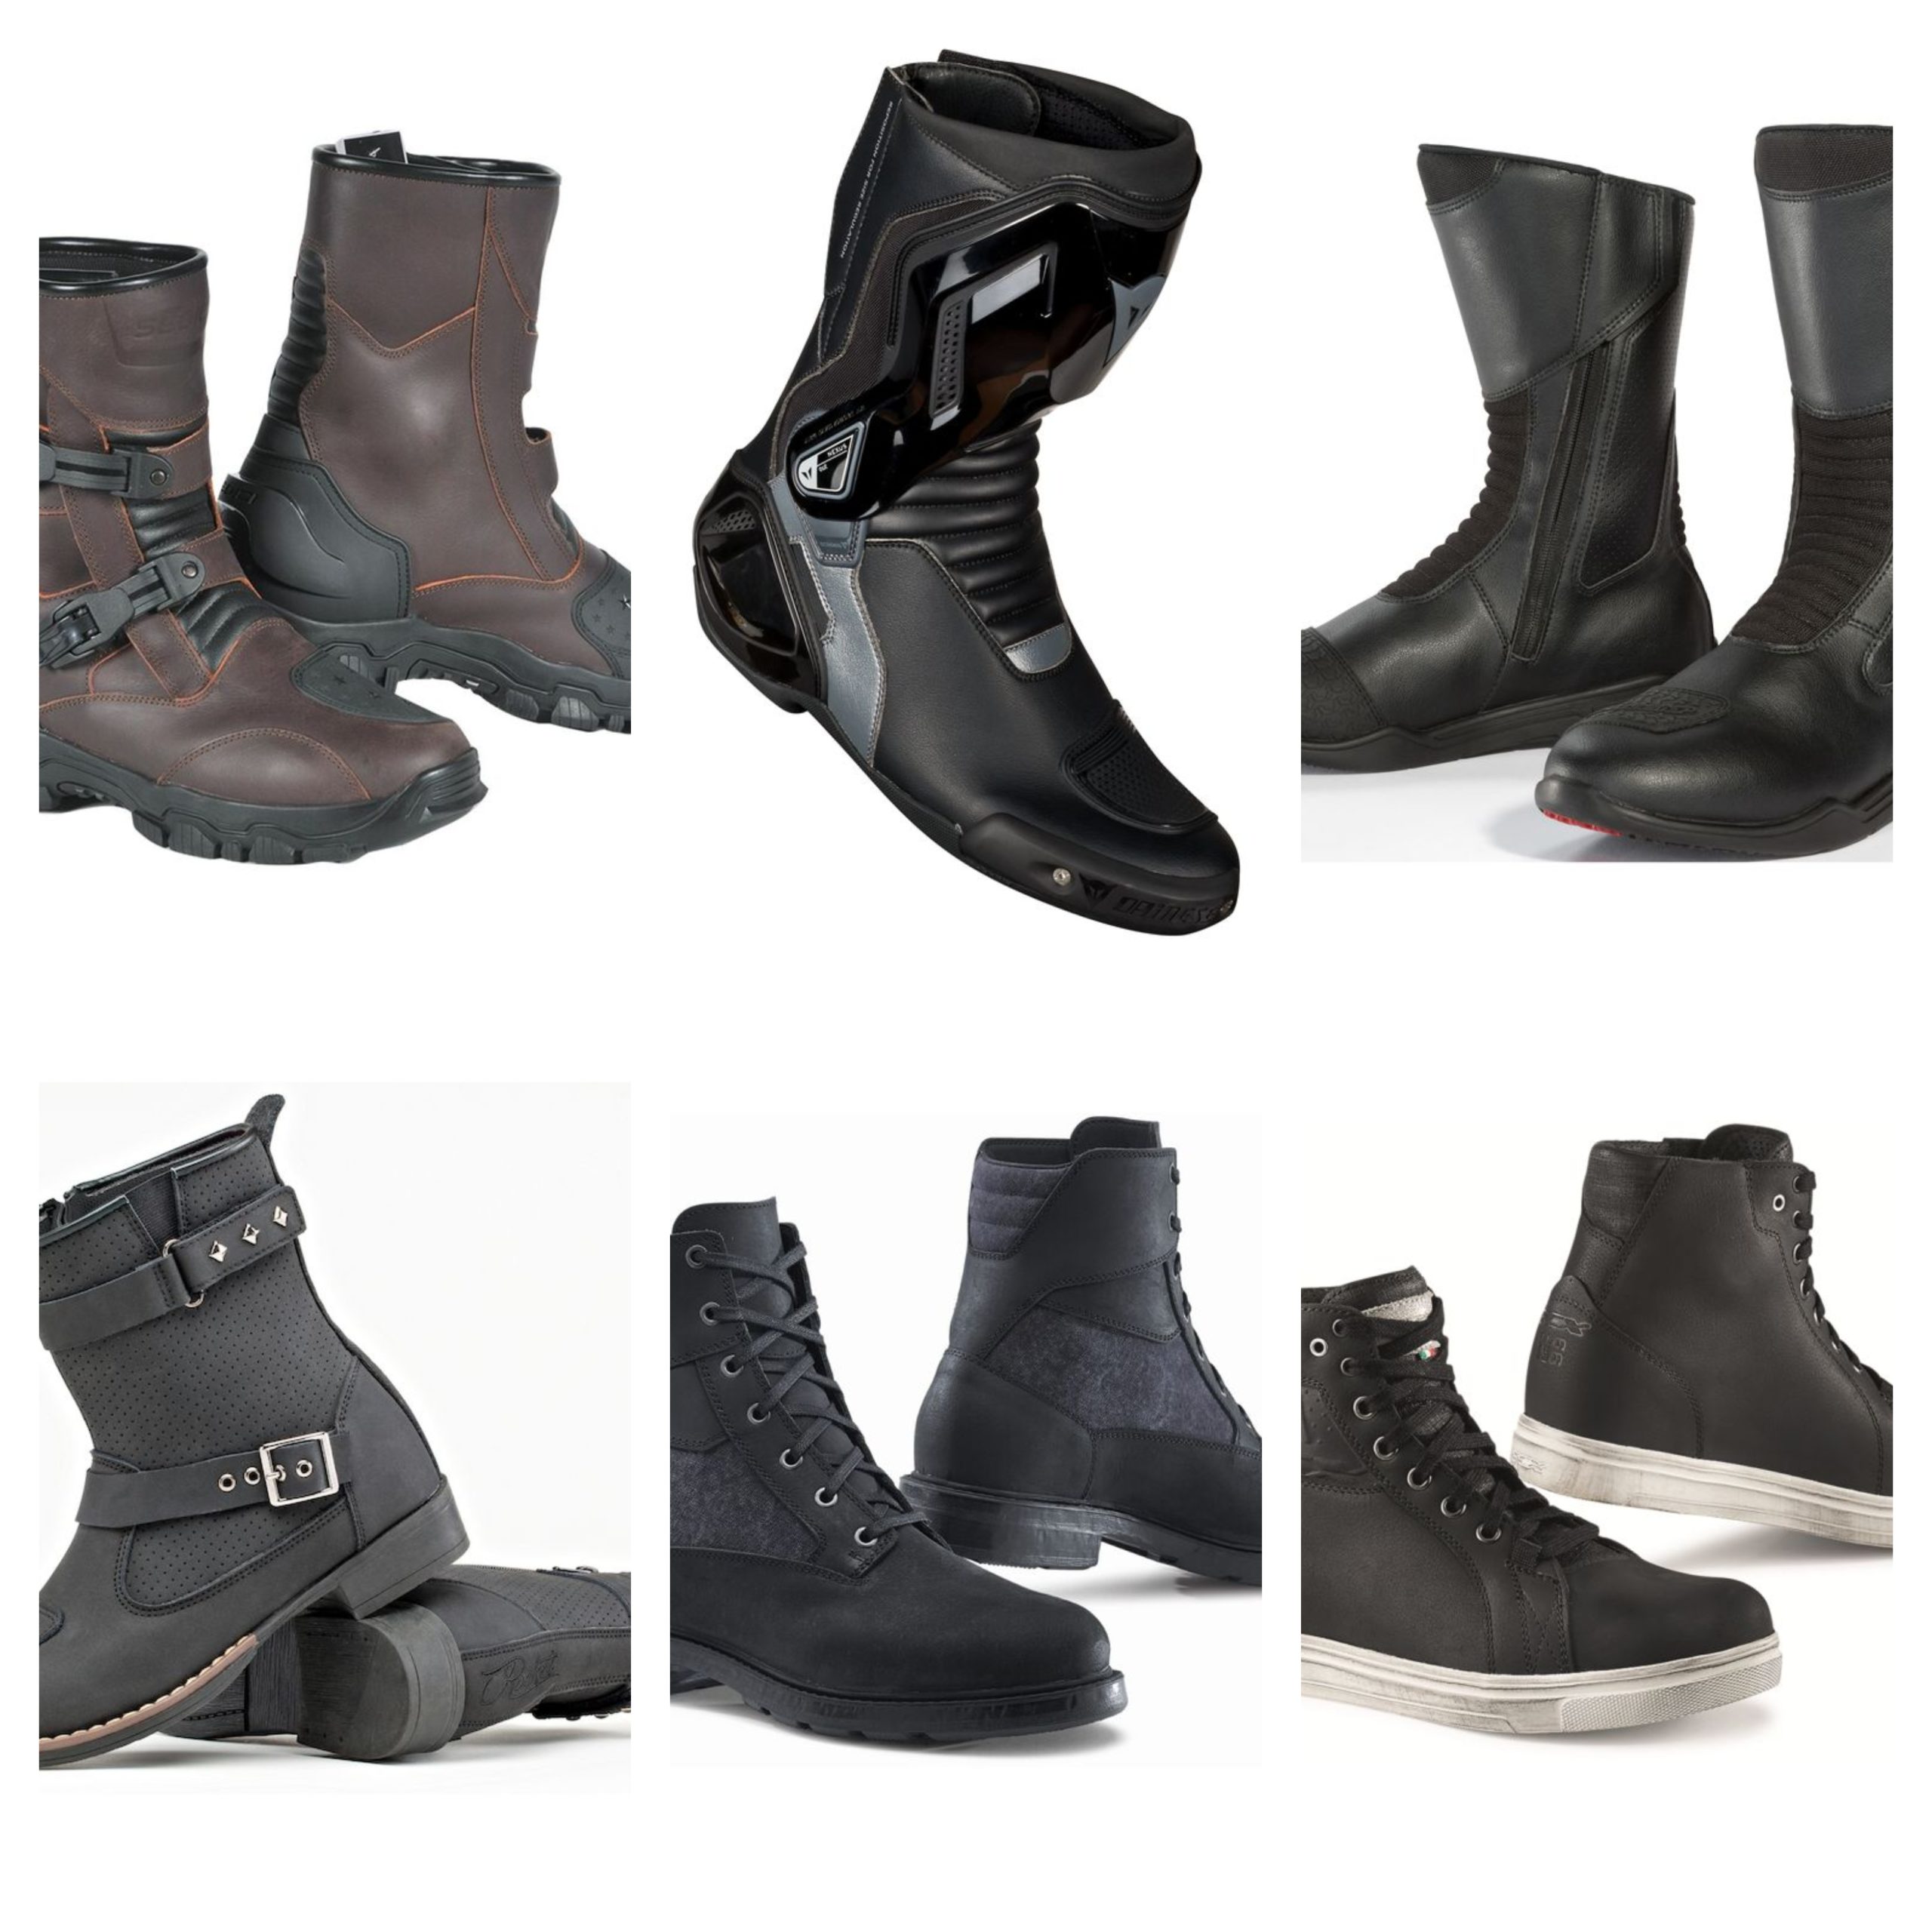 Deal of the Week: Over 25% Off Select Riding Boots - webBikeWorld